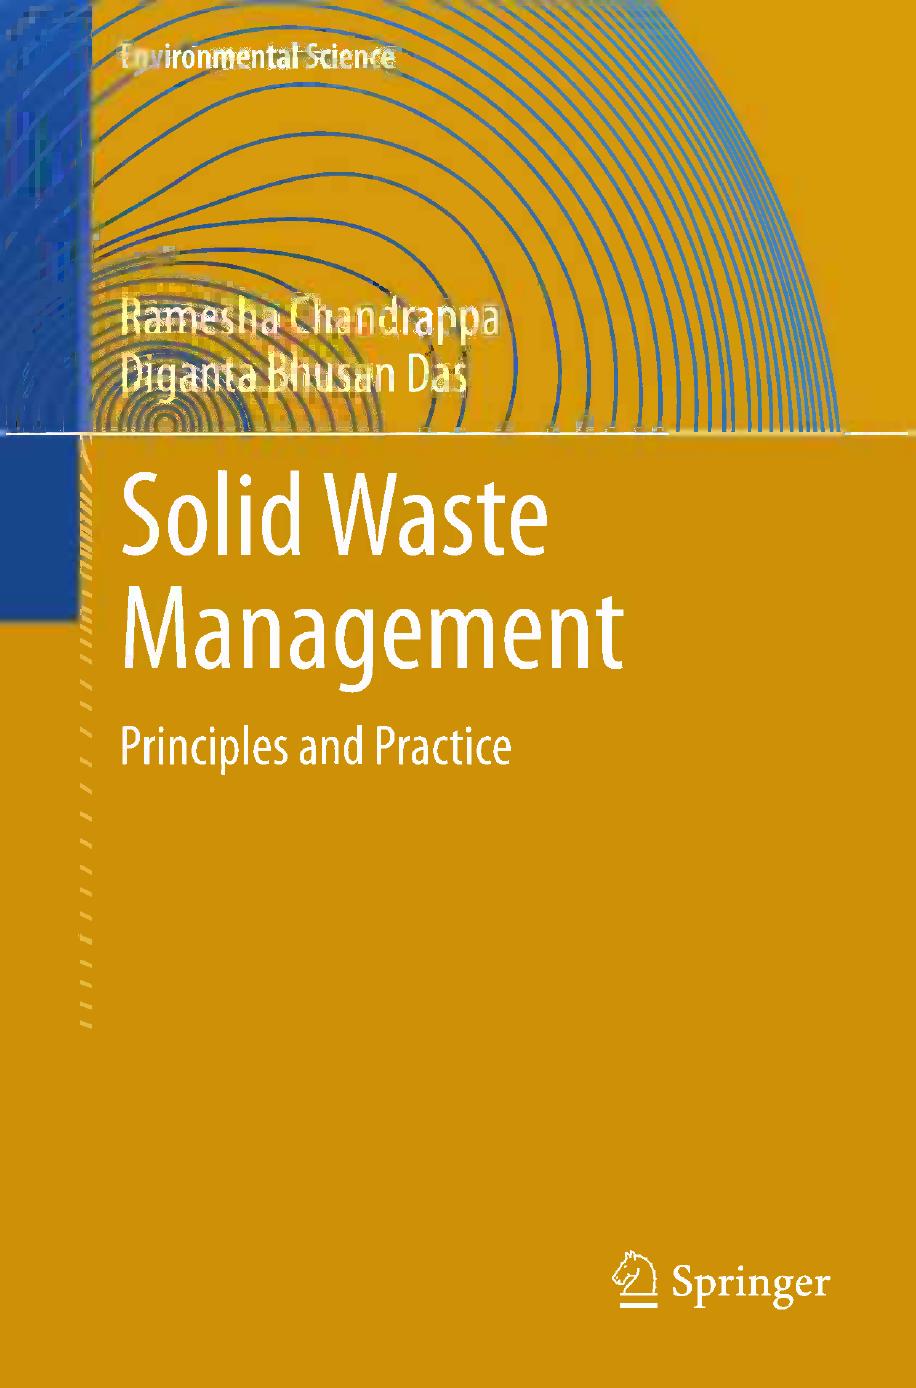 Solid Waste Management Principles and Practice 2012